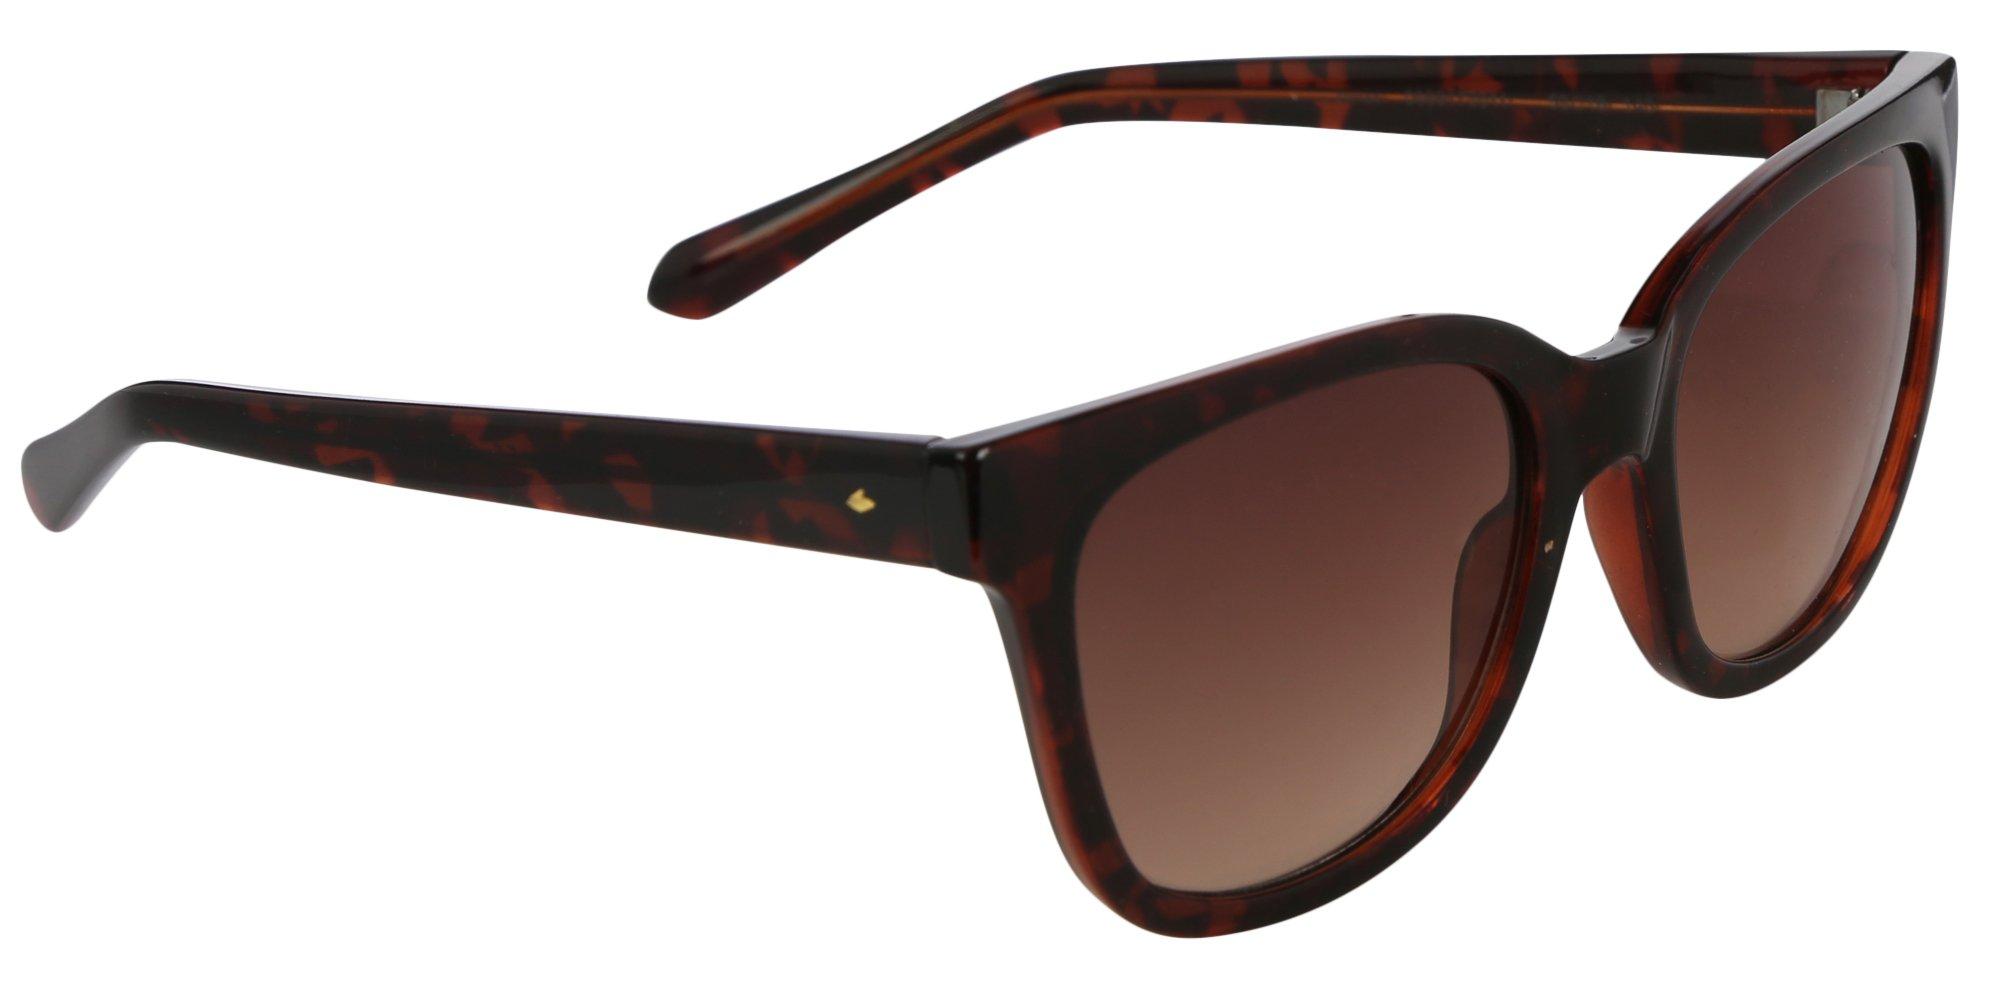 Fossil Womens Tortoise Shell Square Tinted Sunglasses